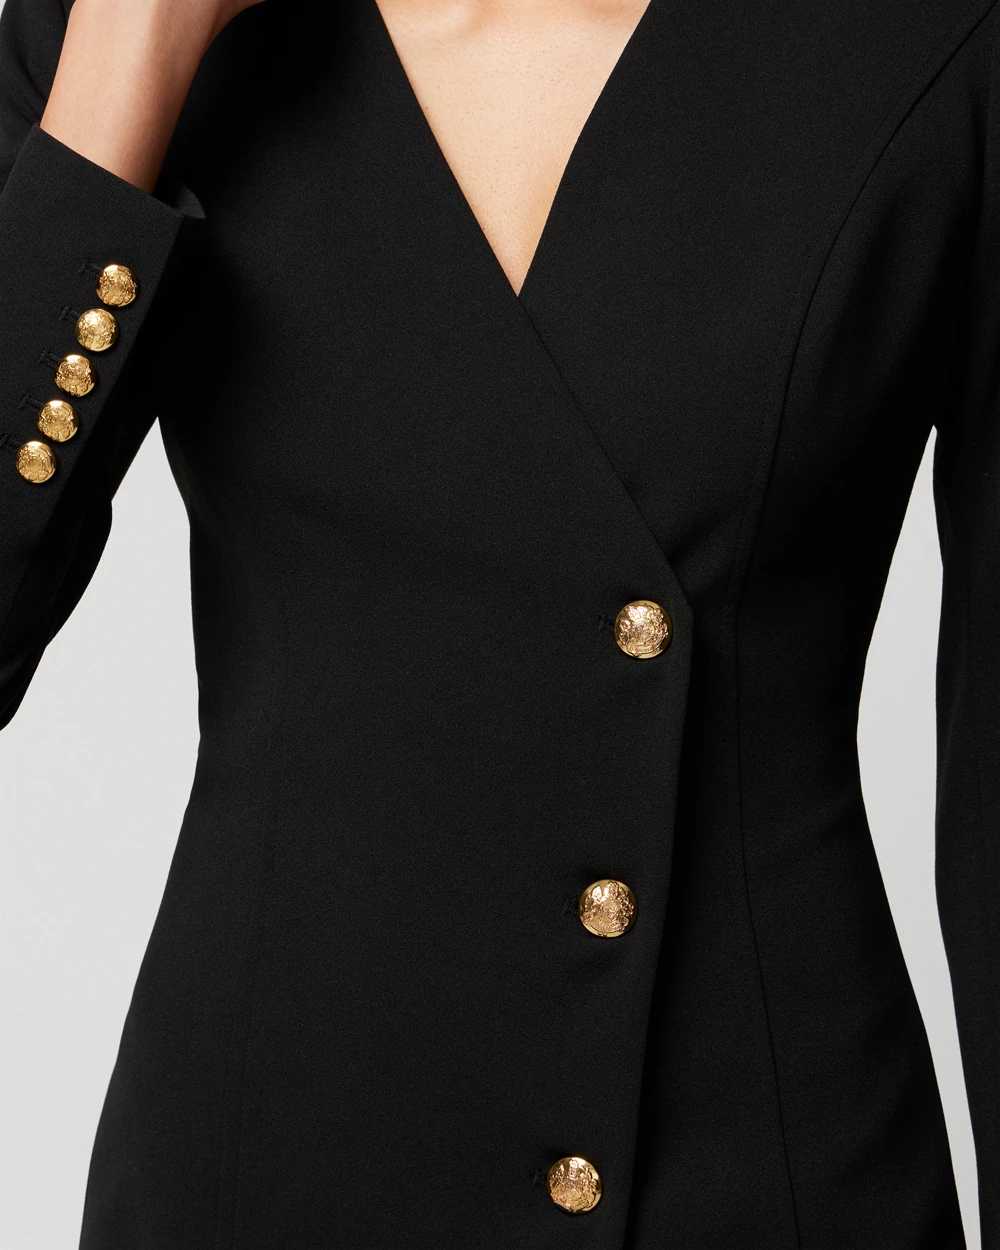 Petite Long Sleeve Blazer Dress click to view larger image.